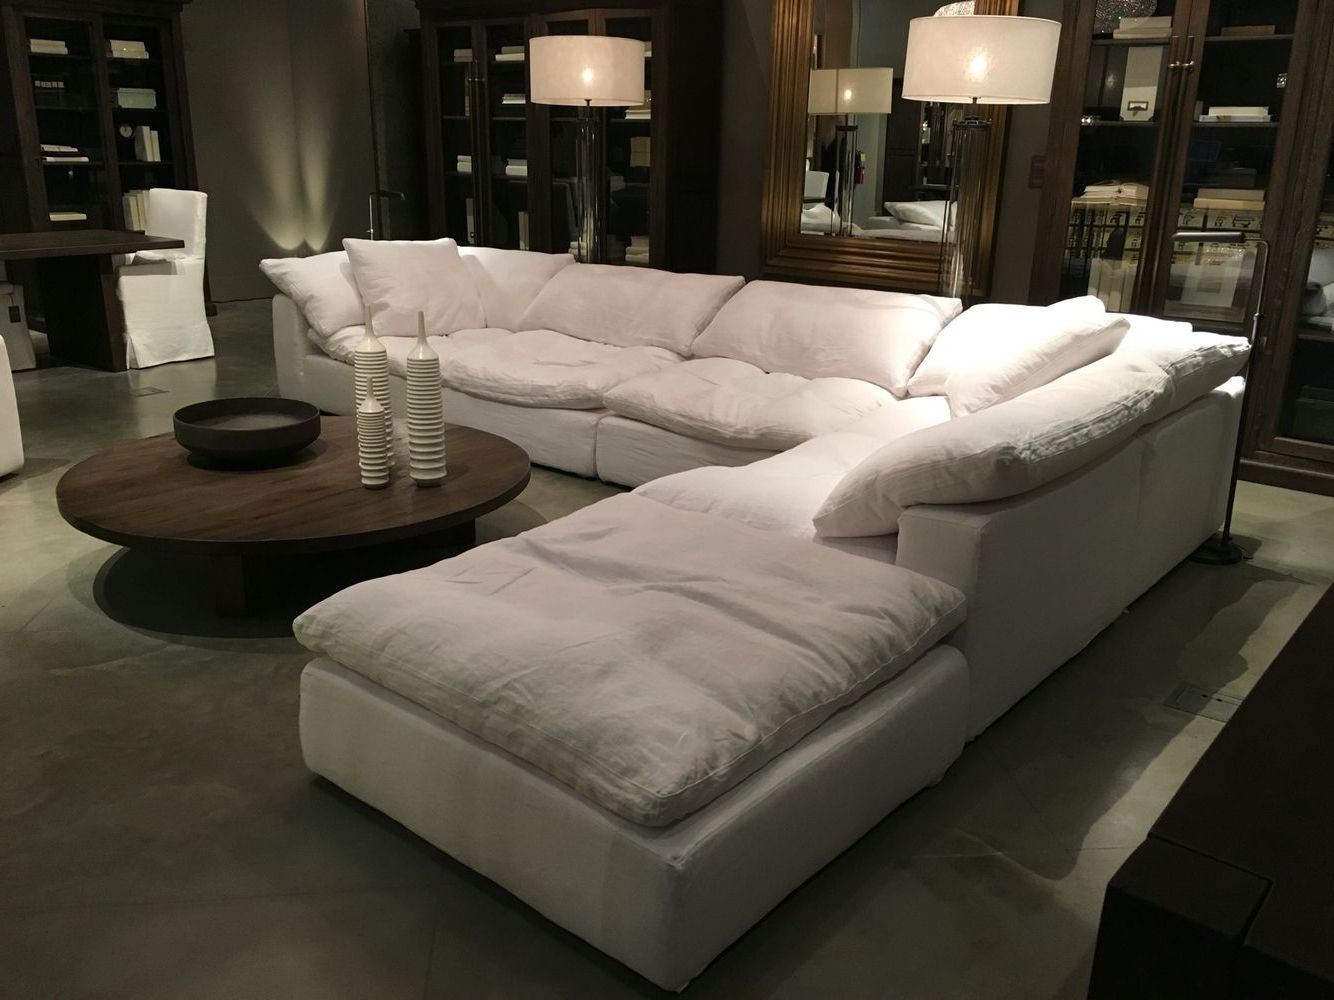 [%restoration Hardware Sectional "cloud" Couch | [future Home With Most Popular Comfortable Sectional Sofas|comfortable Sectional Sofas Intended For Most Popular Restoration Hardware Sectional "cloud" Couch | [future Home|popular Comfortable Sectional Sofas Intended For Restoration Hardware Sectional "cloud" Couch | [future Home|preferred Restoration Hardware Sectional "cloud" Couch | [future Home Pertaining To Comfortable Sectional Sofas%] (View 11 of 15)